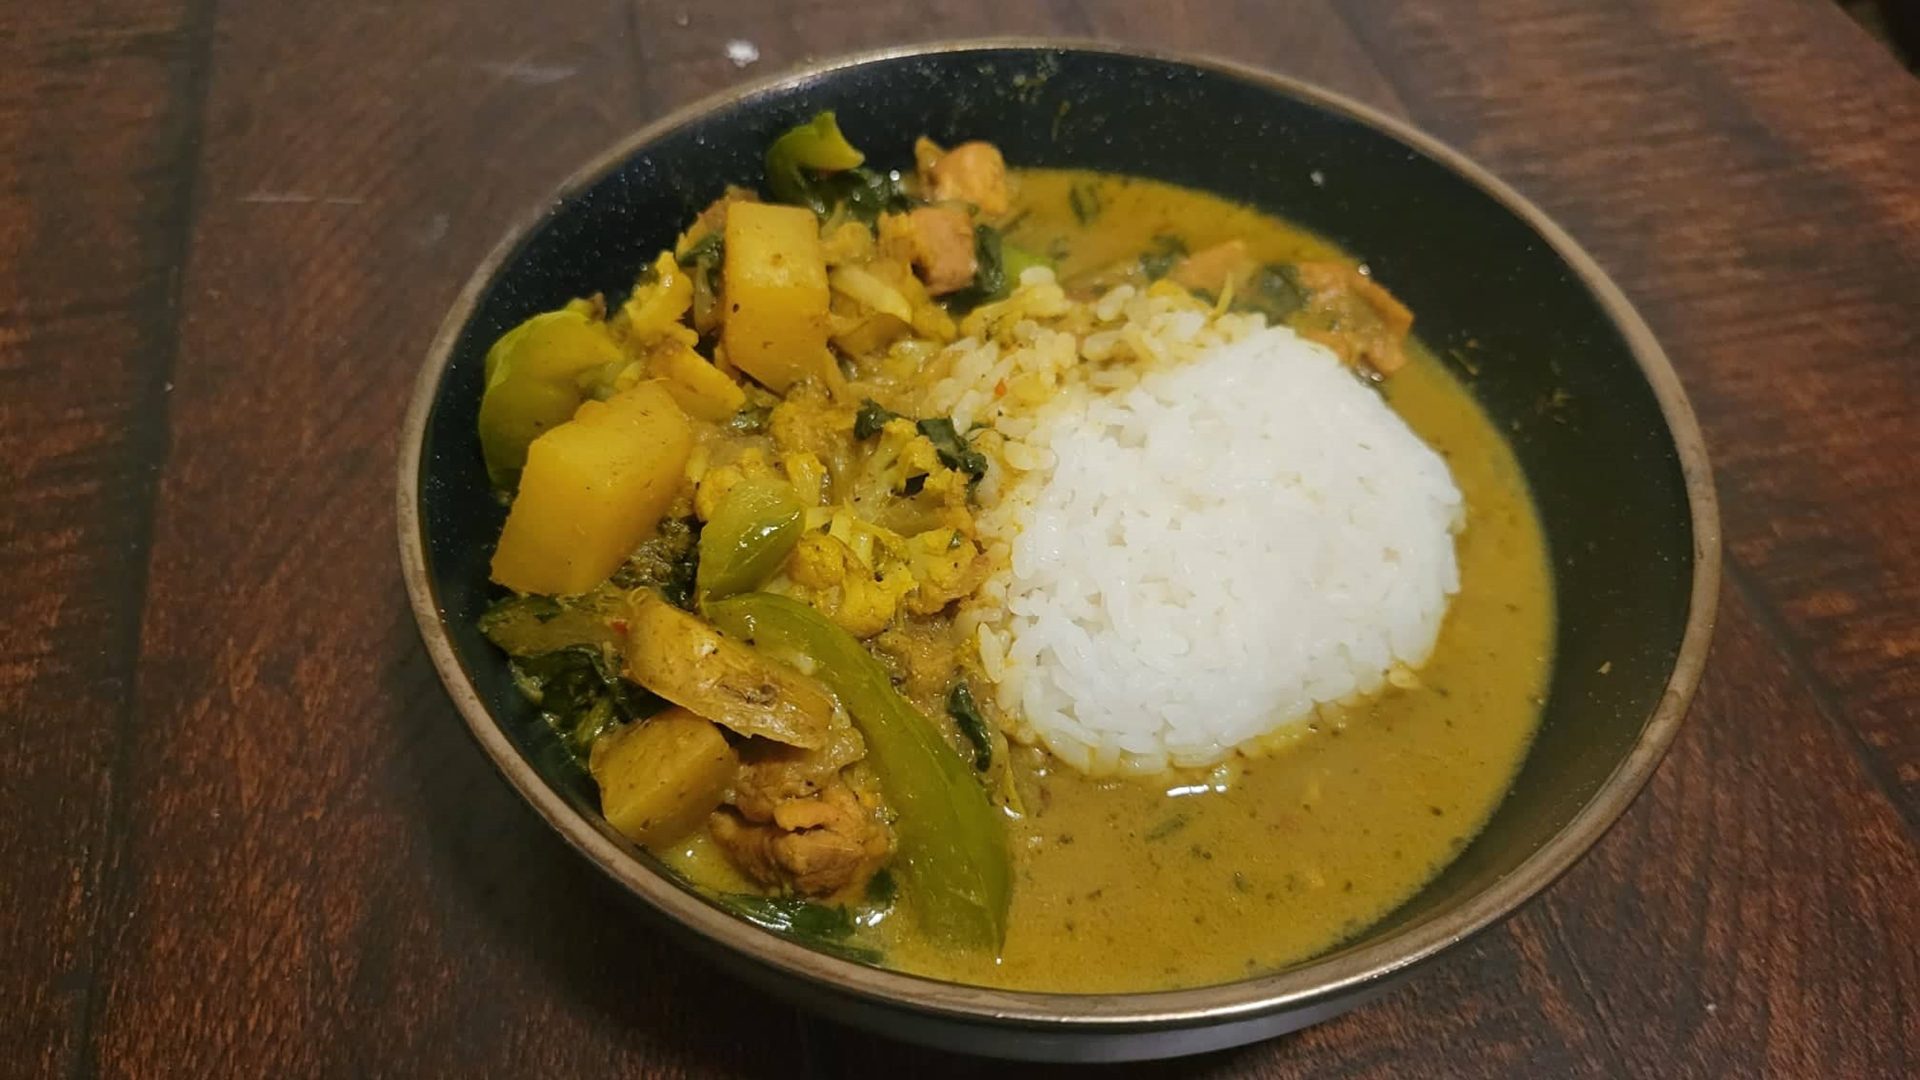 Green curry with chicken and coconut rice.